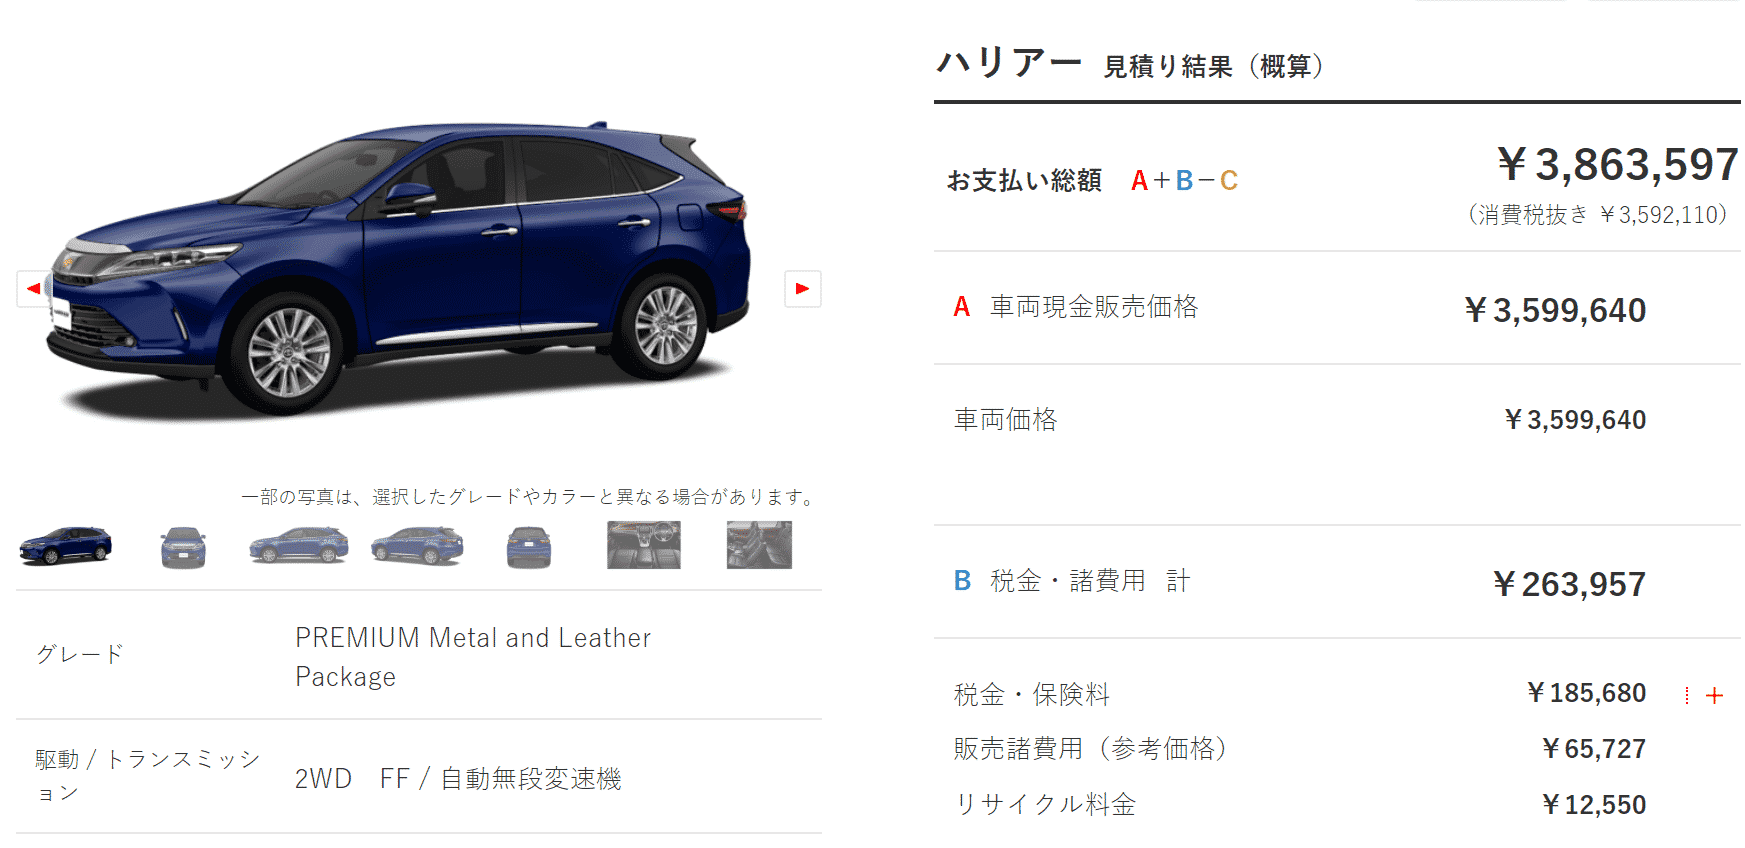 「PREMIUM “Metal and Leather Package”」ガソリン車の支払い総額目処の画像